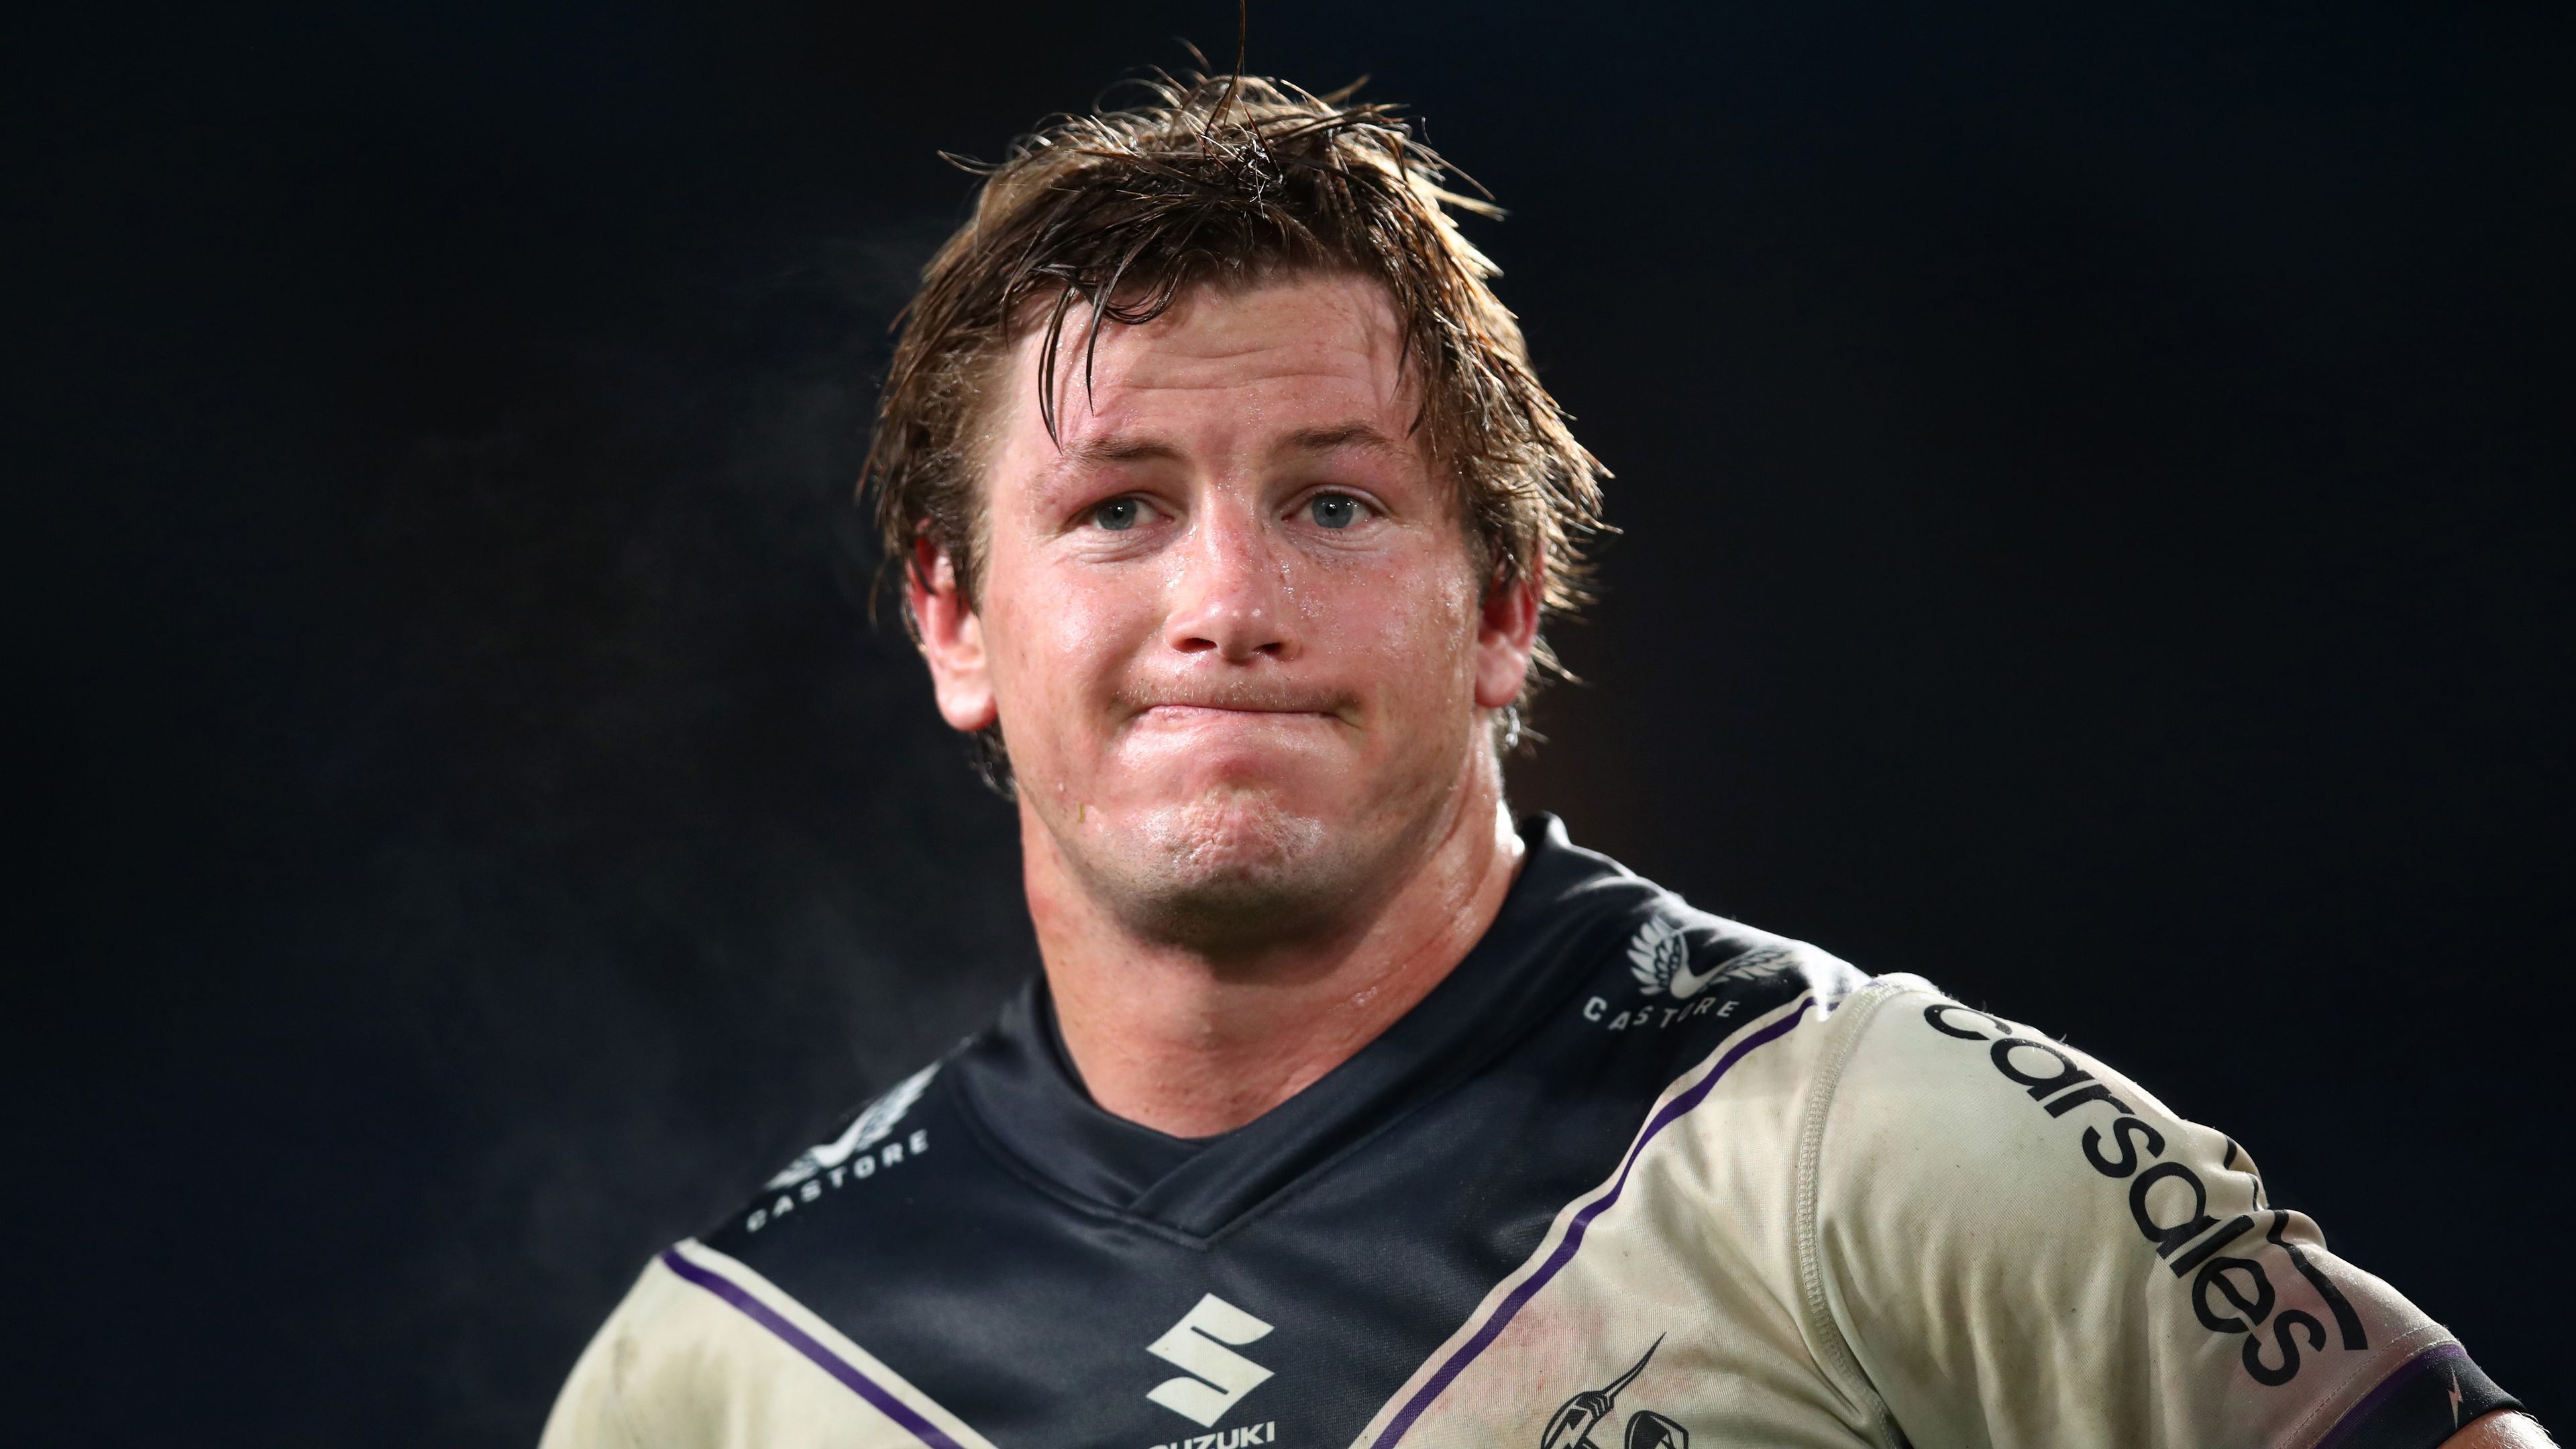 Harry Grant of the Storm looks dejected after a loss during the round 19 NRL match between the South Sydney Rabbitohs and the Melbourne Storm at Stadium Australia on July 23, 2022 in Sydney, Australia. (Photo by Jason McCawley/Getty Images)